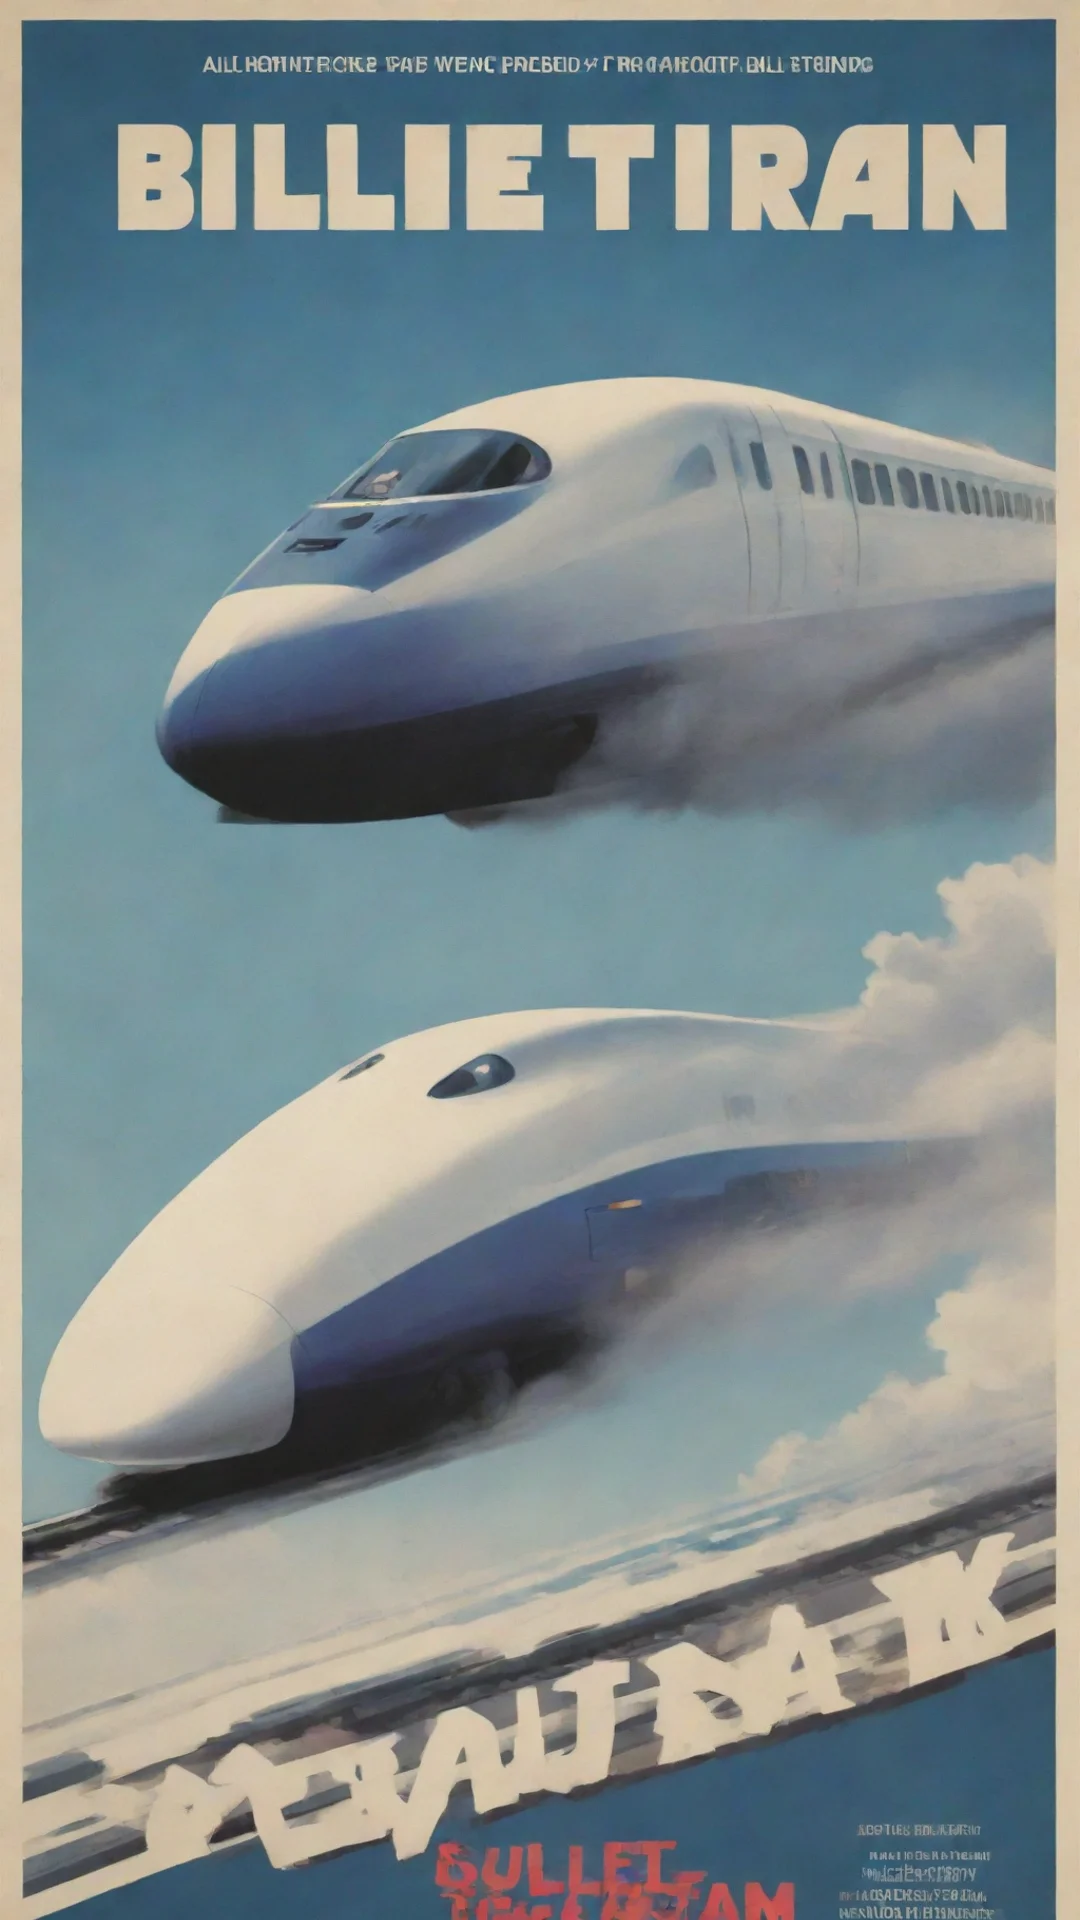 brian miller styled bullet train movie poster  tall